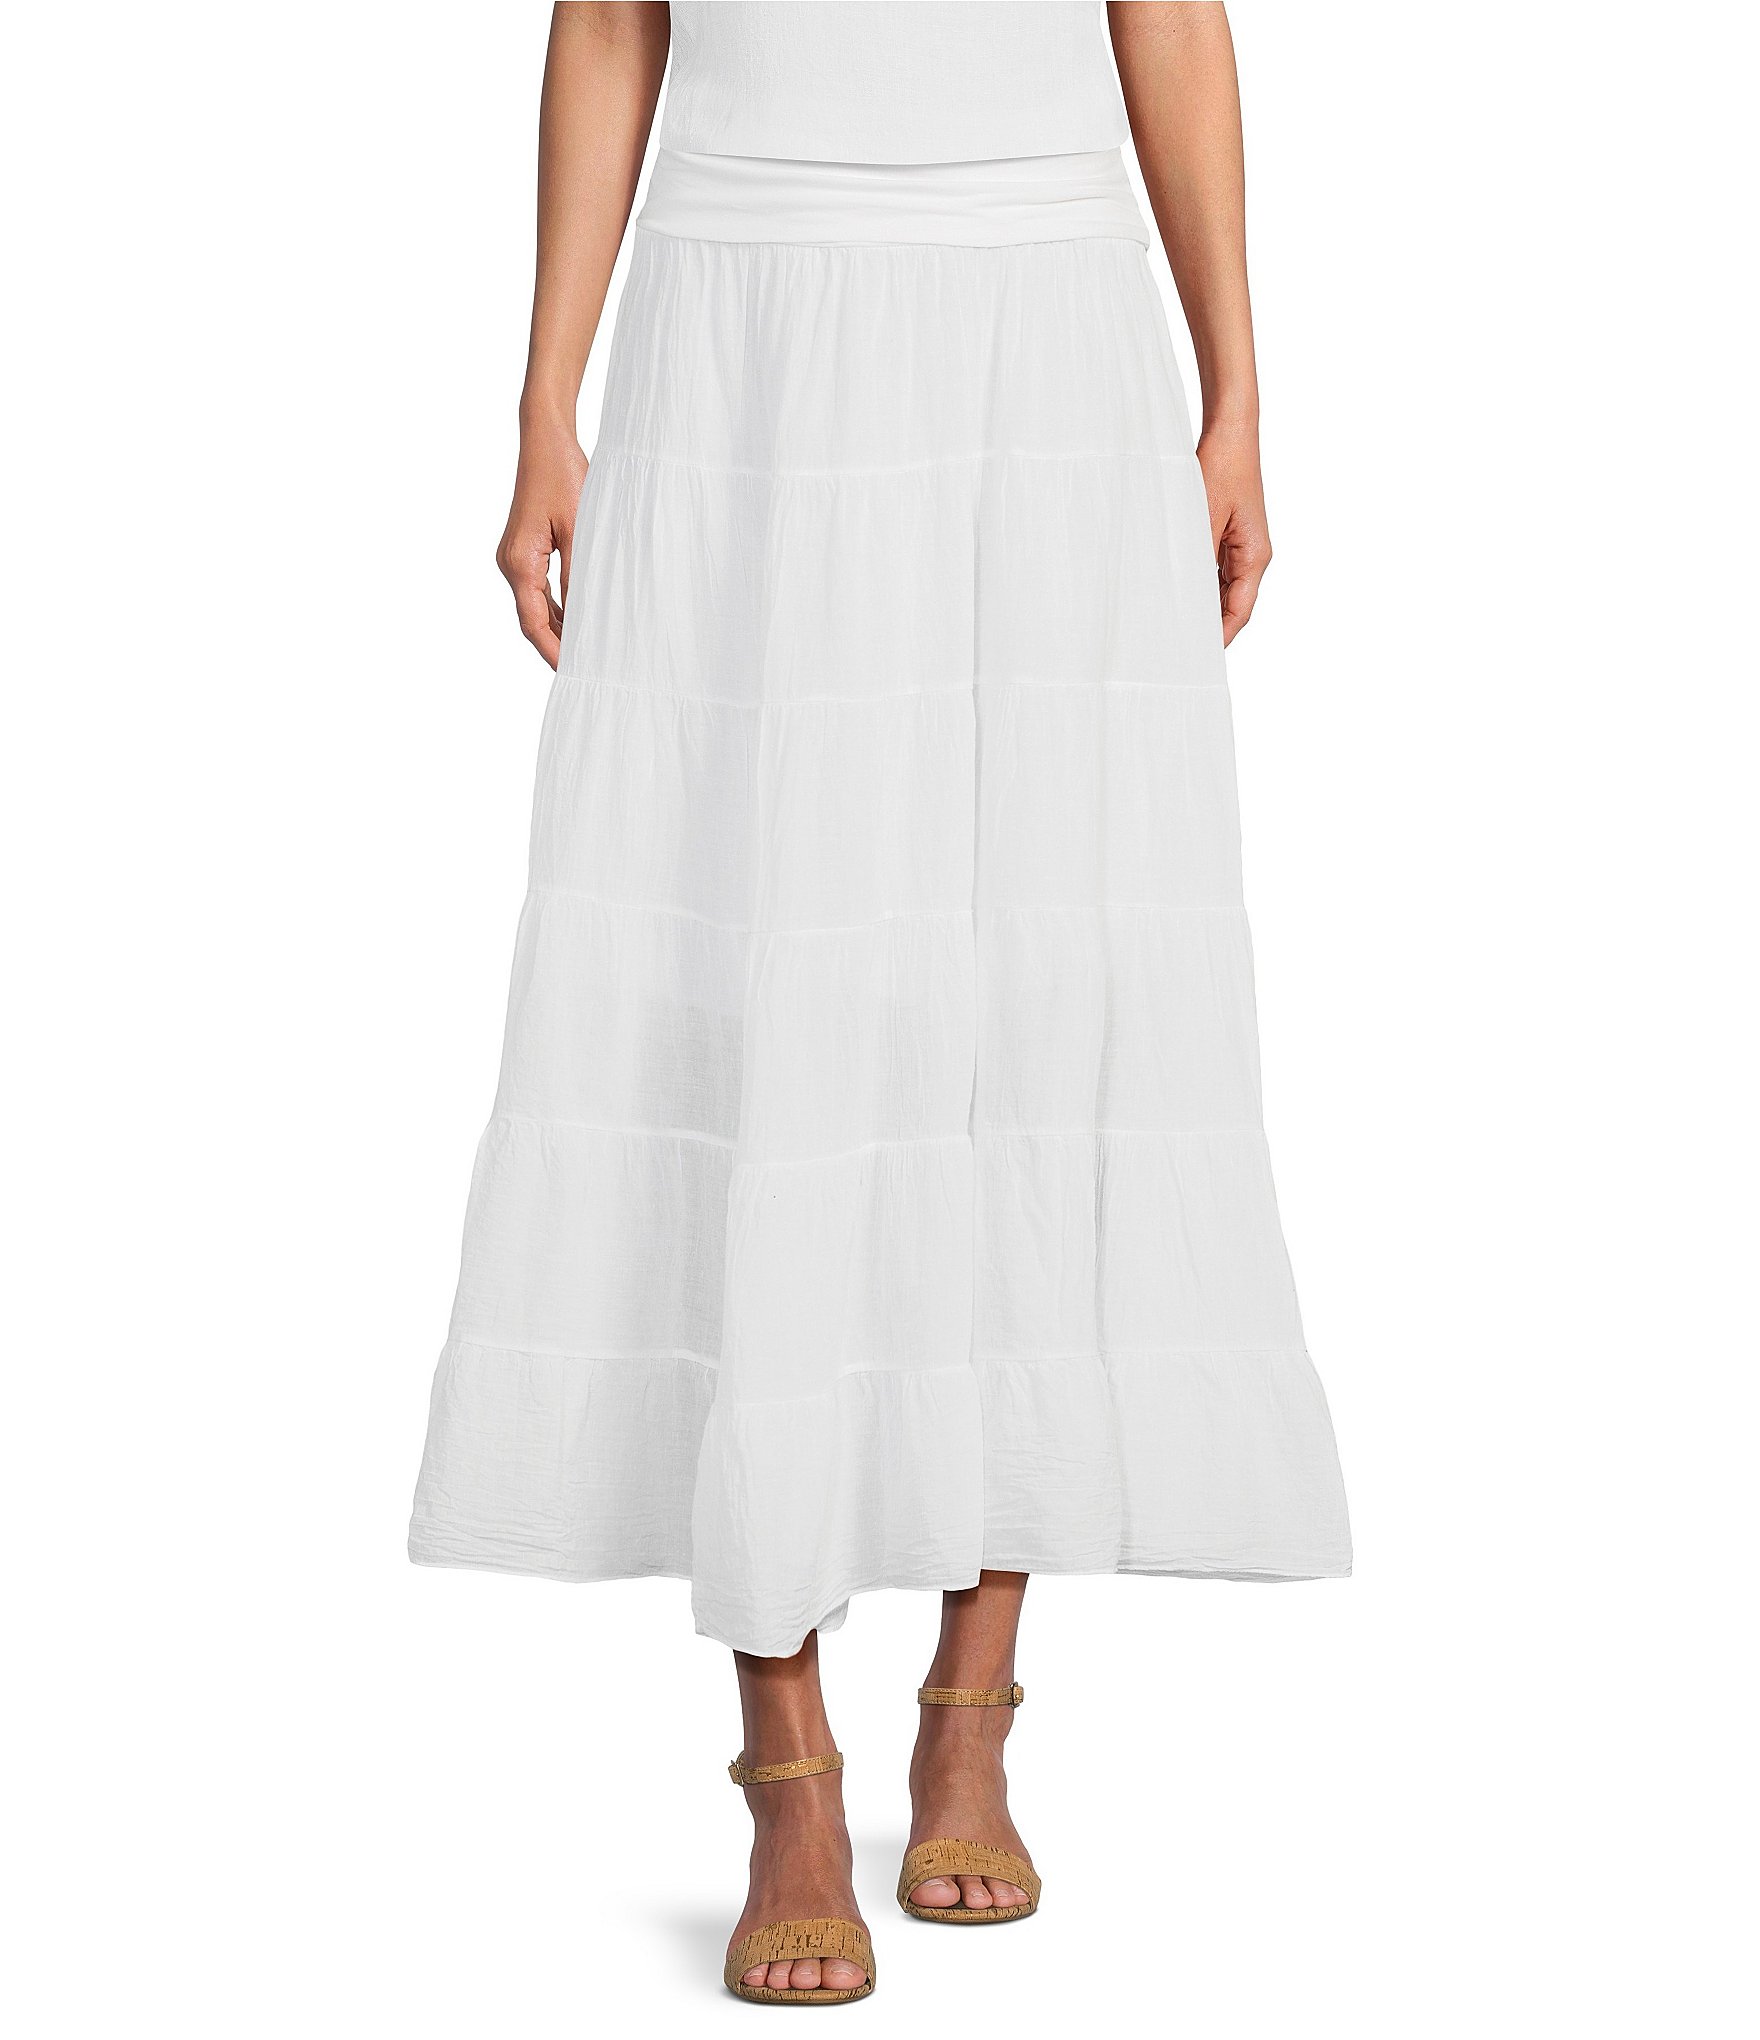 M Made In Italy Cotton Tiered A-Line Maxi Skirt | Dillard's